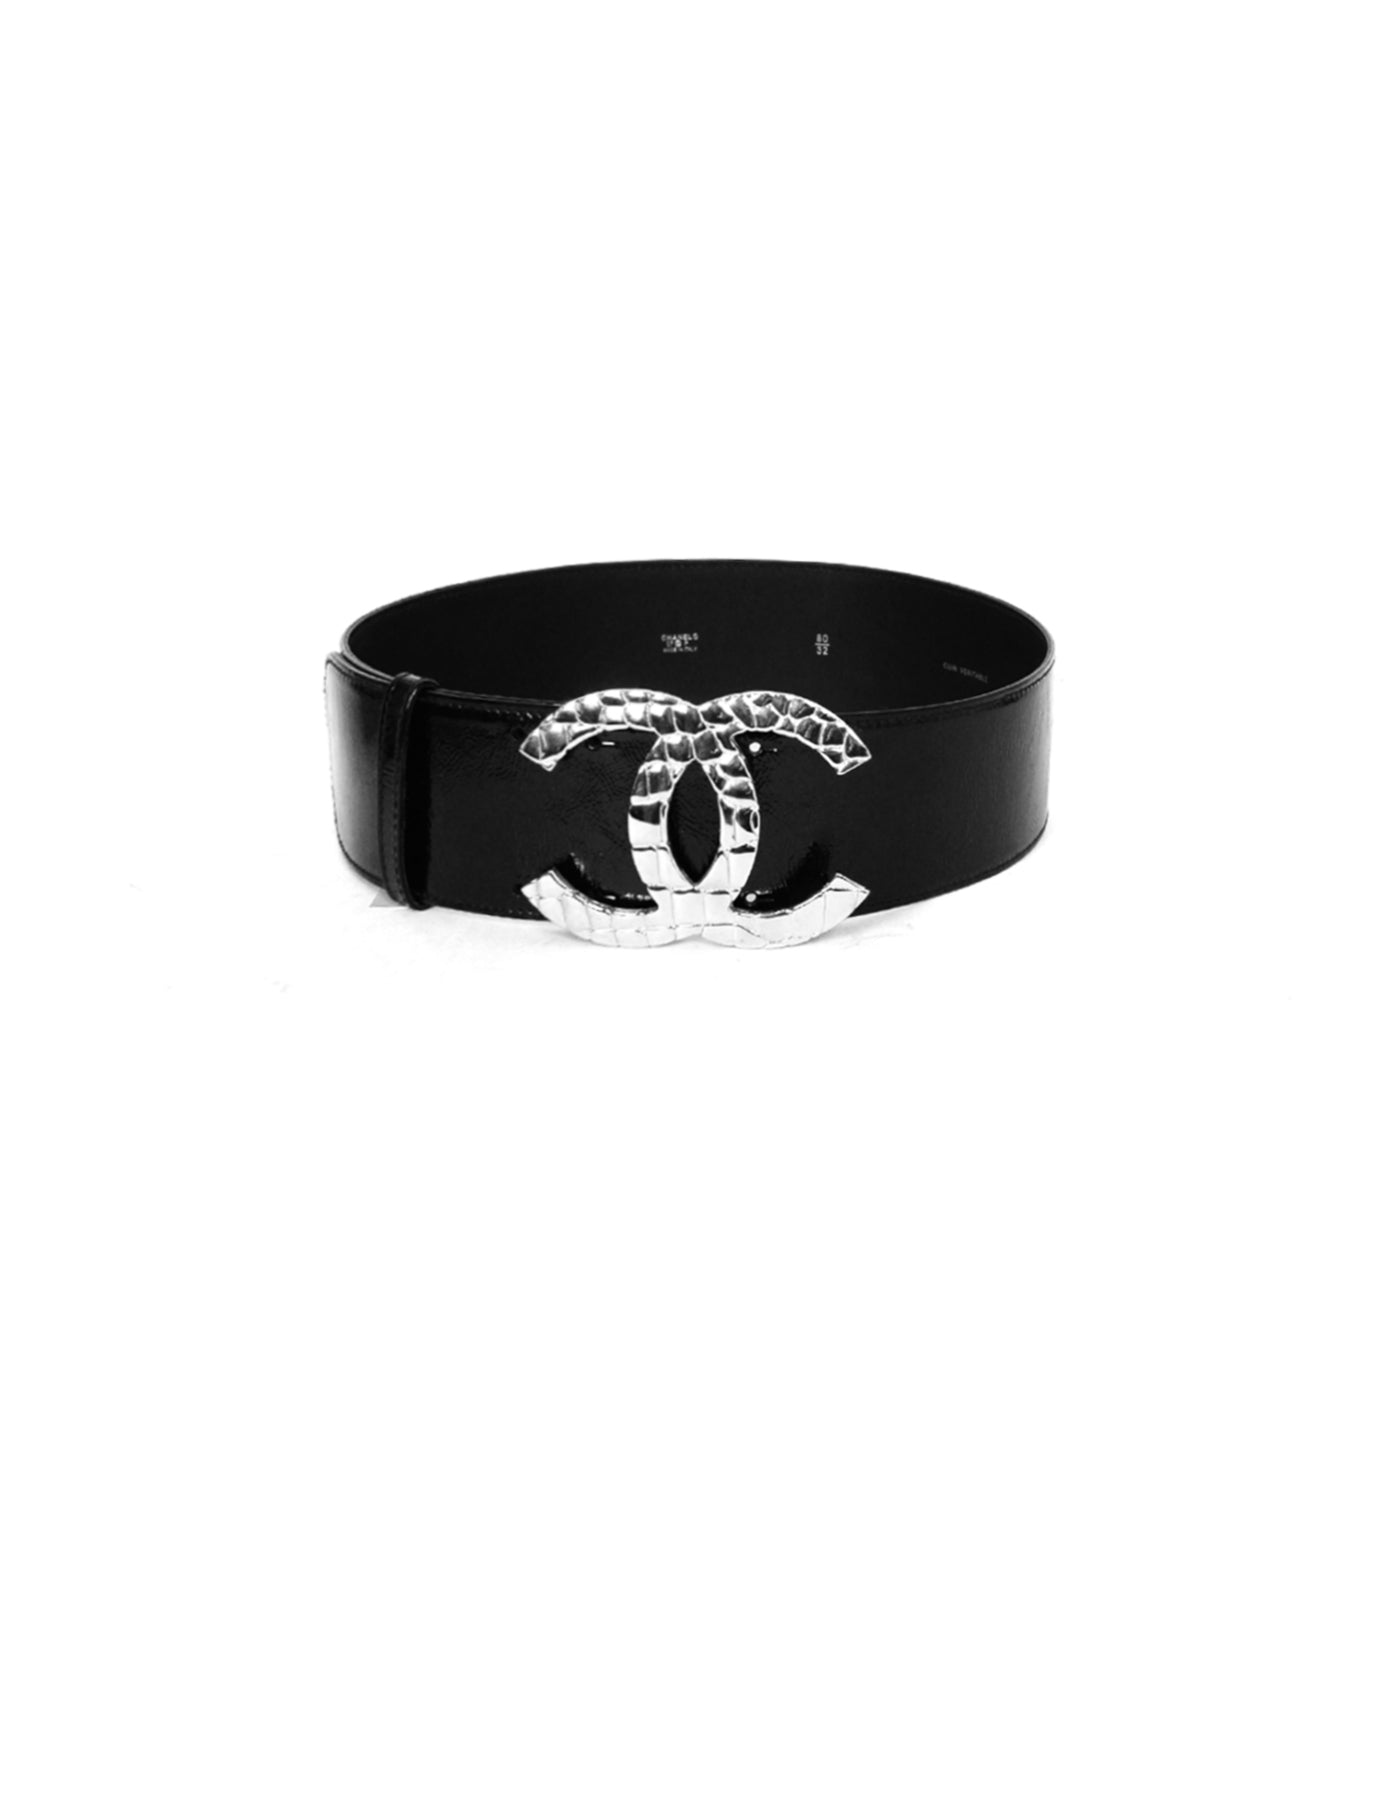 Chanel Black Patent Leather Wide Belt with Quilted CC Logo sz 80/32